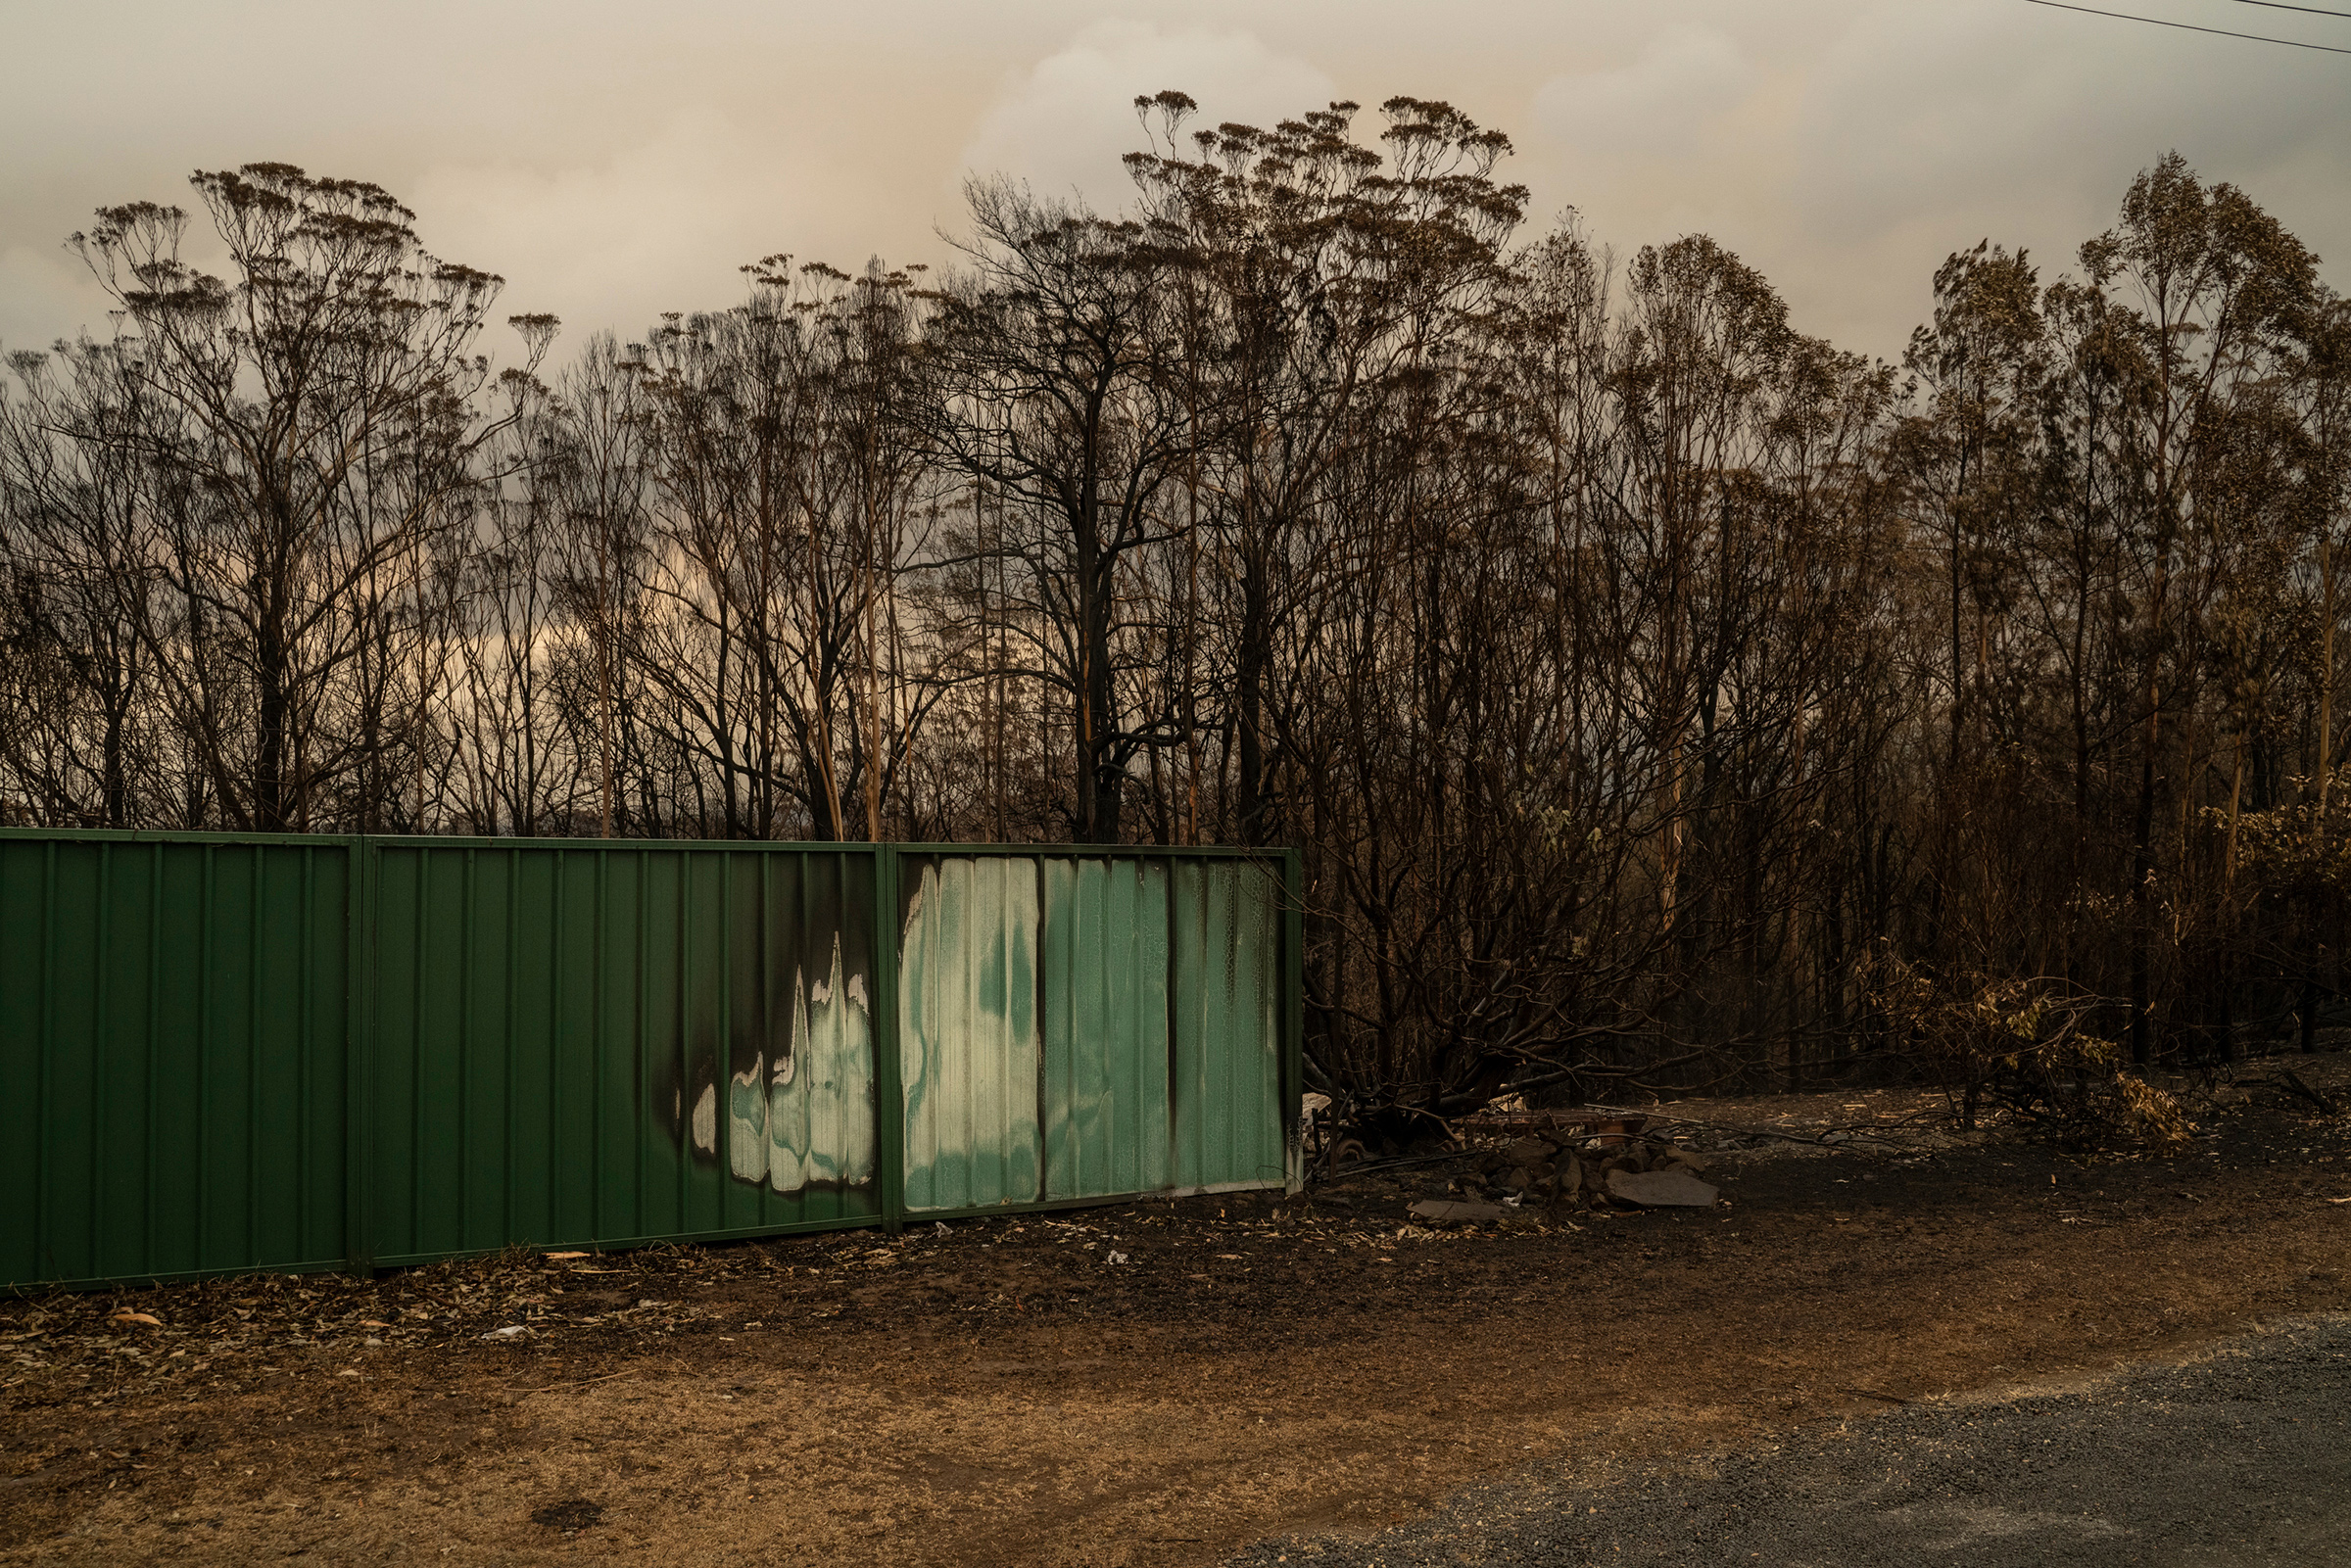 A burned fence in Lake Conjola on Jan. 5. The community was devastated by flames in late December. (Adam Ferguson for TIME)